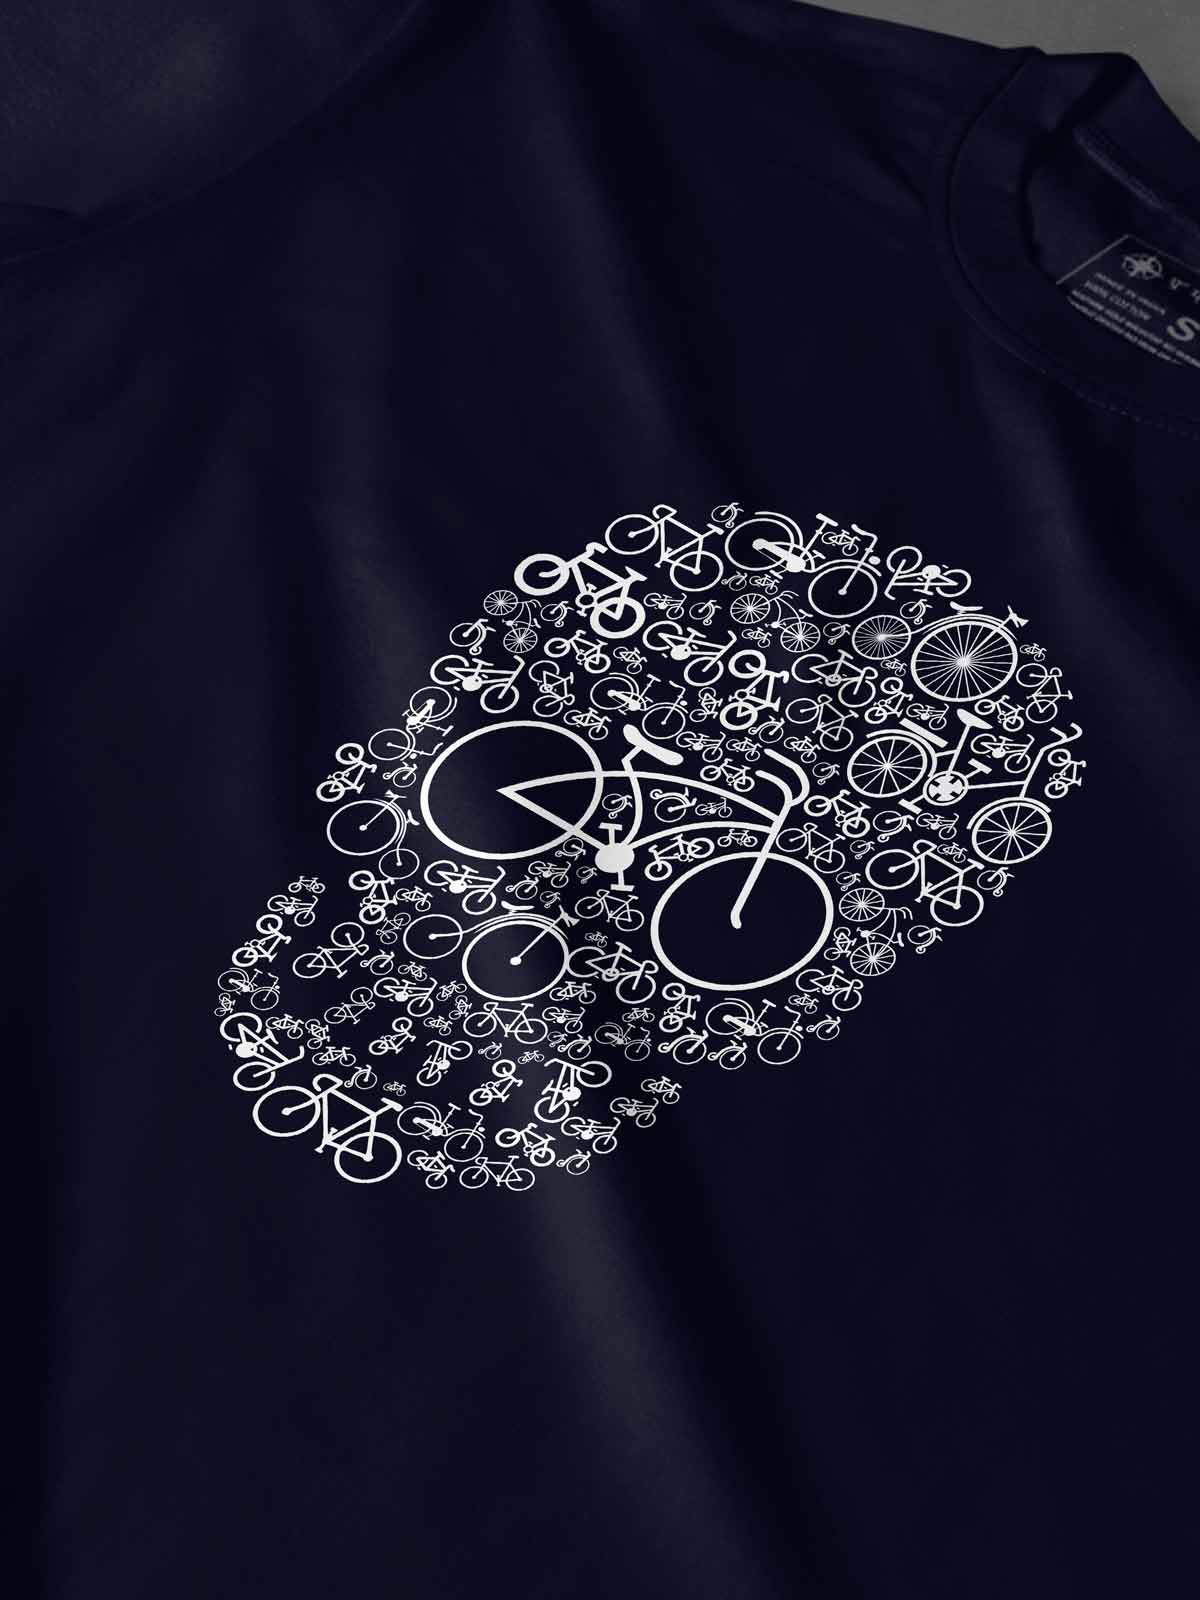 Cycle-head-printed-t-shirt-for-men by Ghumakkad